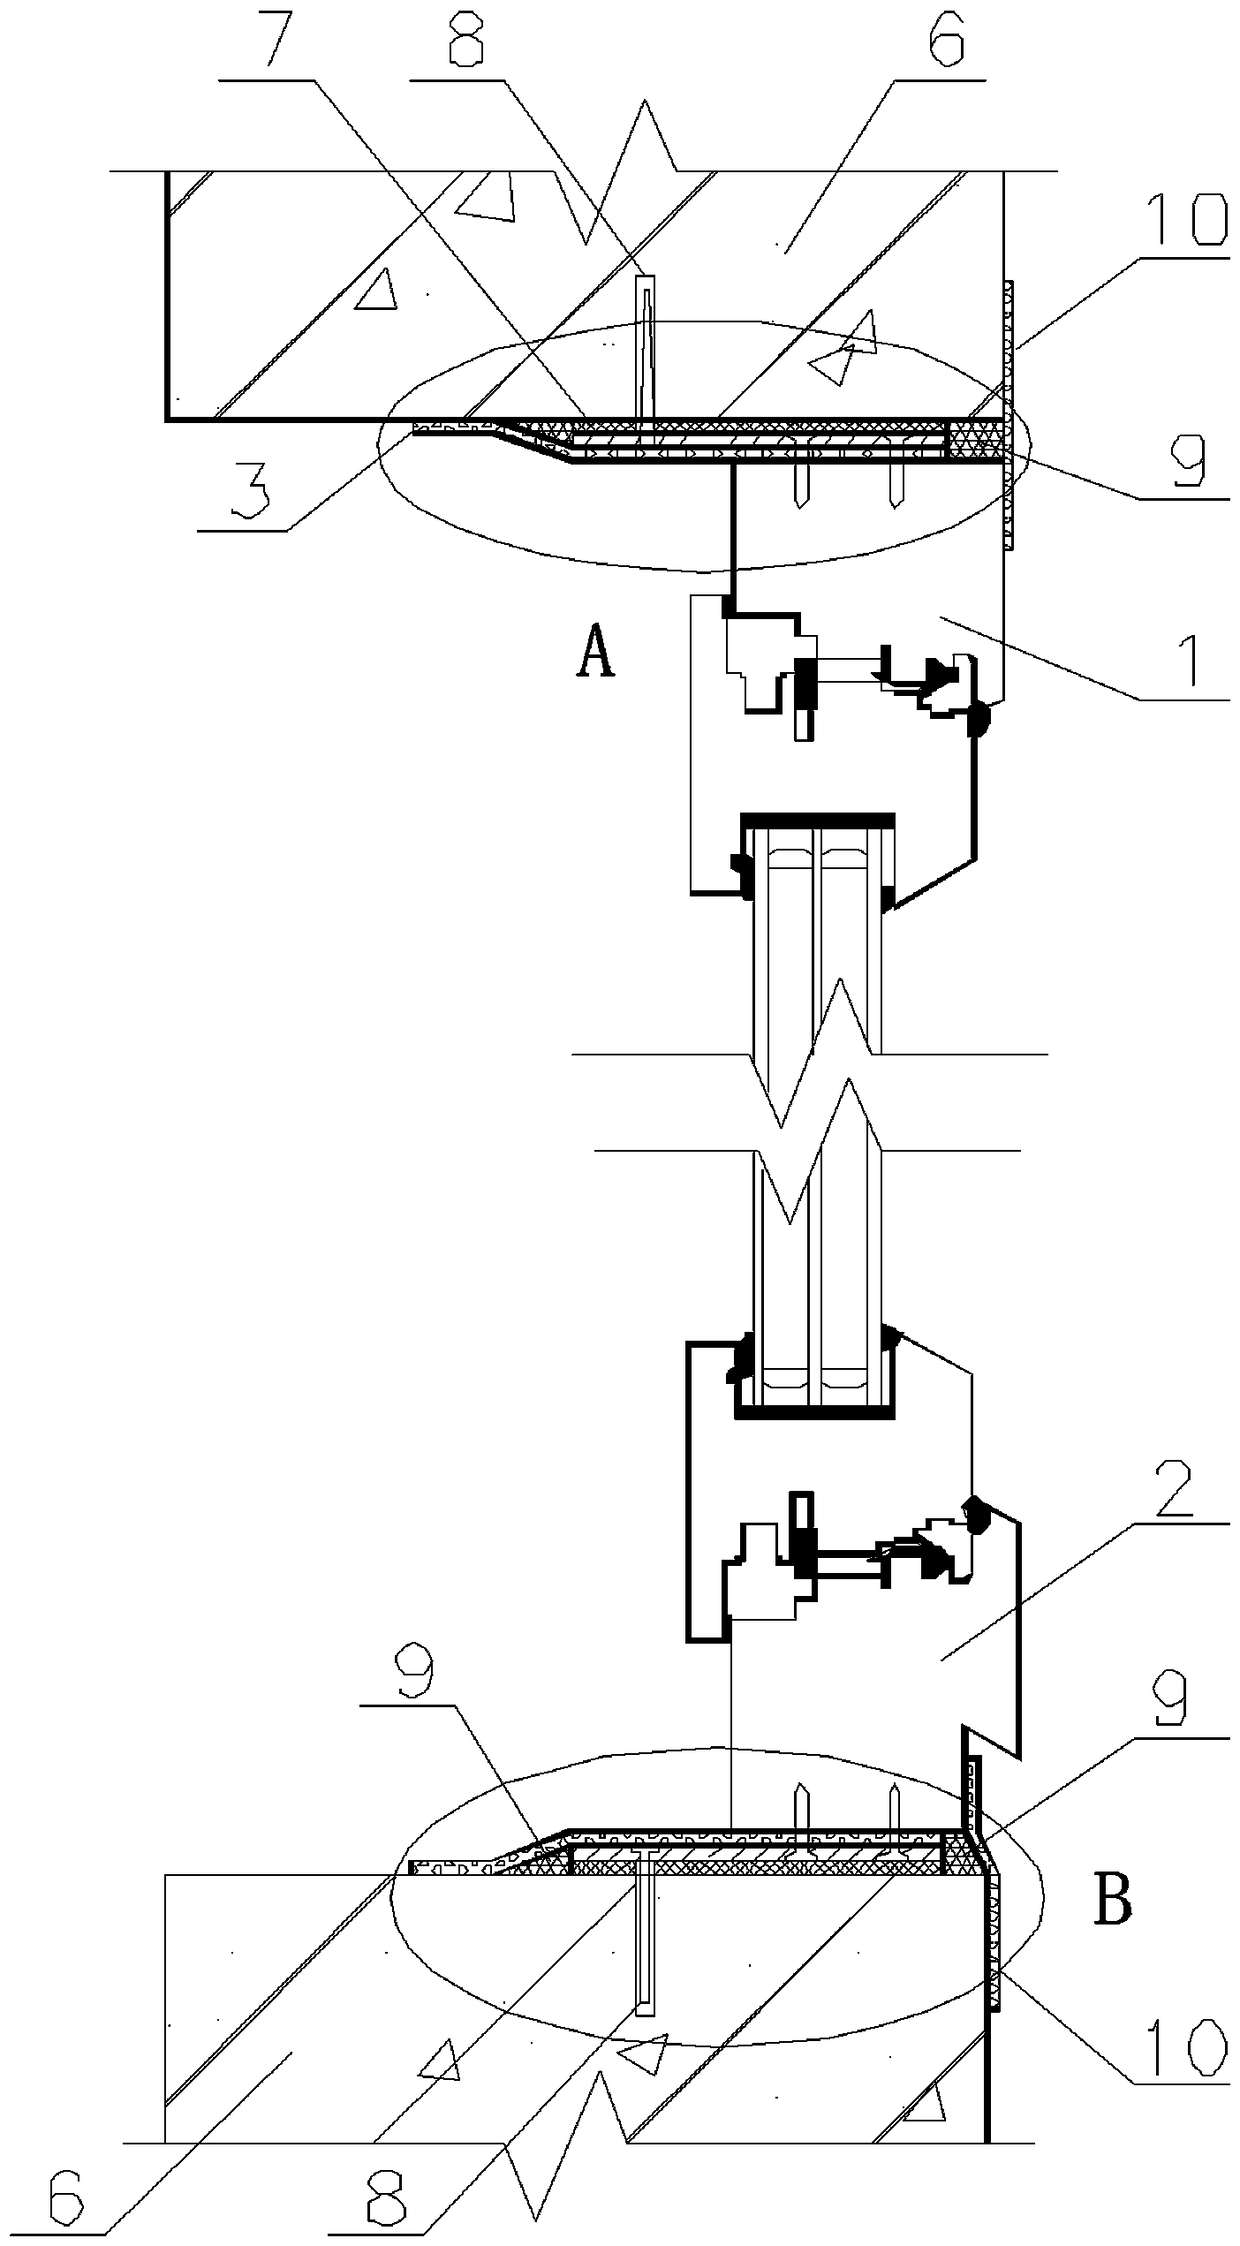 An opening built-in door and window structure and its installation method for the external thermal insulation system of the external wall of the passive building